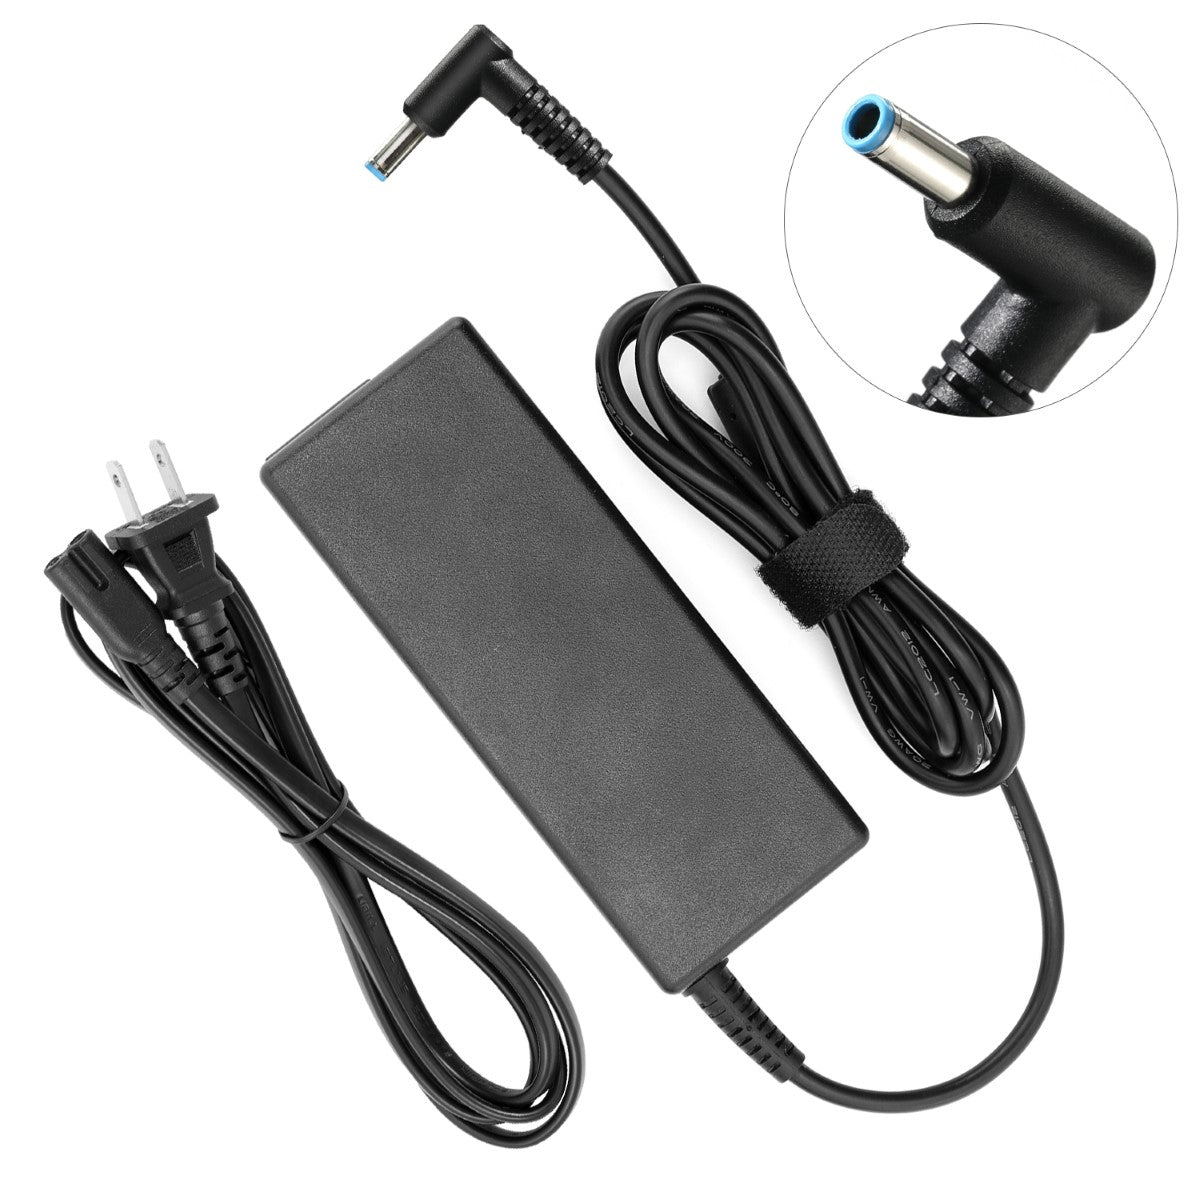 AC Adapter Charger for HP Pavilion Touchsmart 17-f010us Notebook.